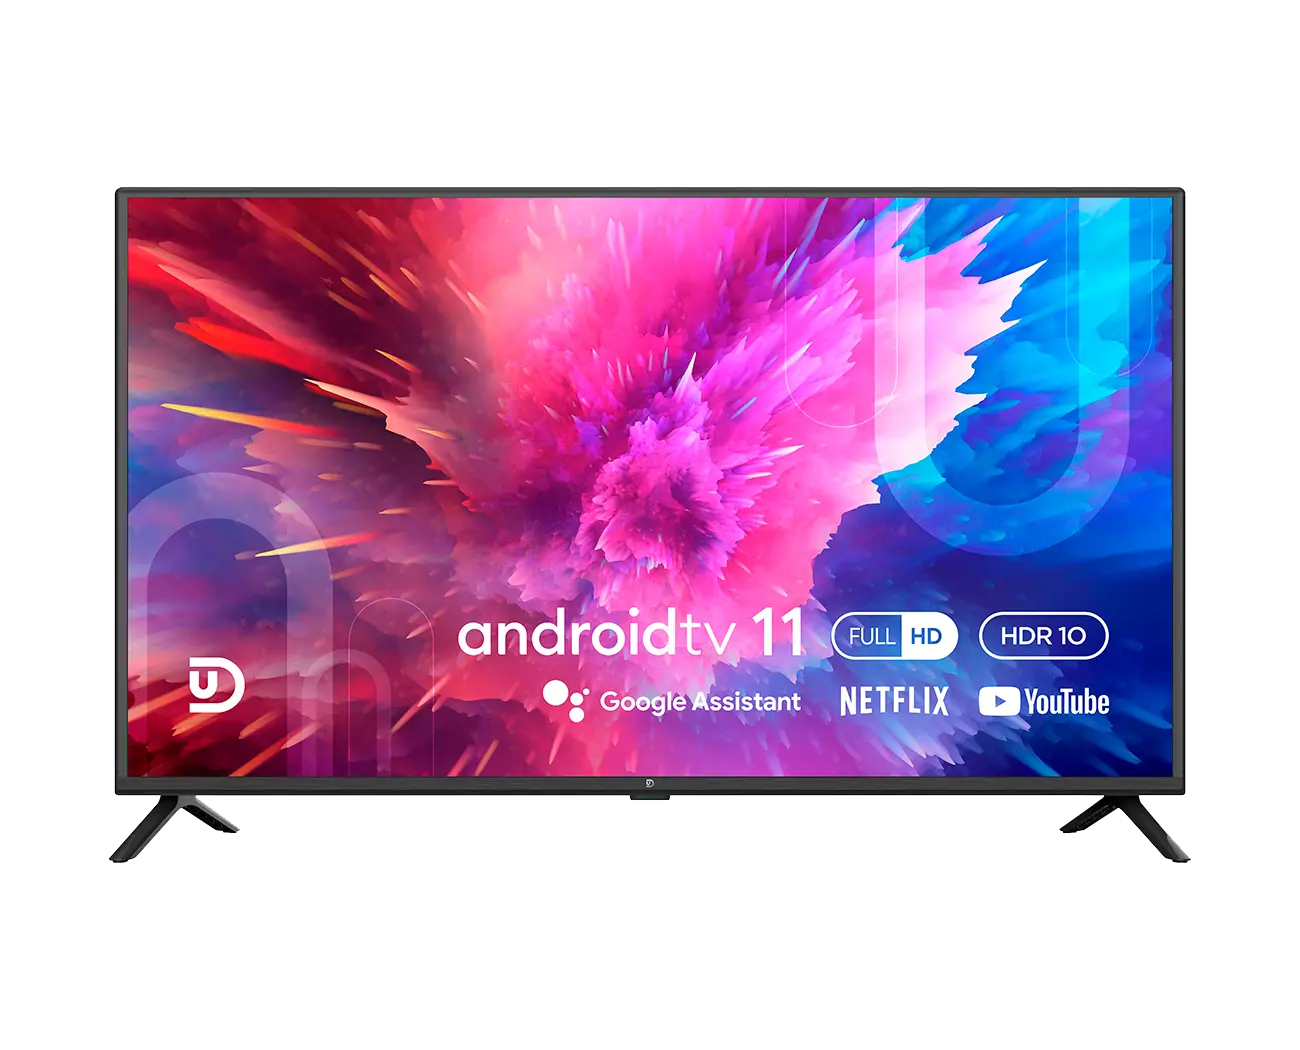 Full HD Android Smart TV UD 40F5210